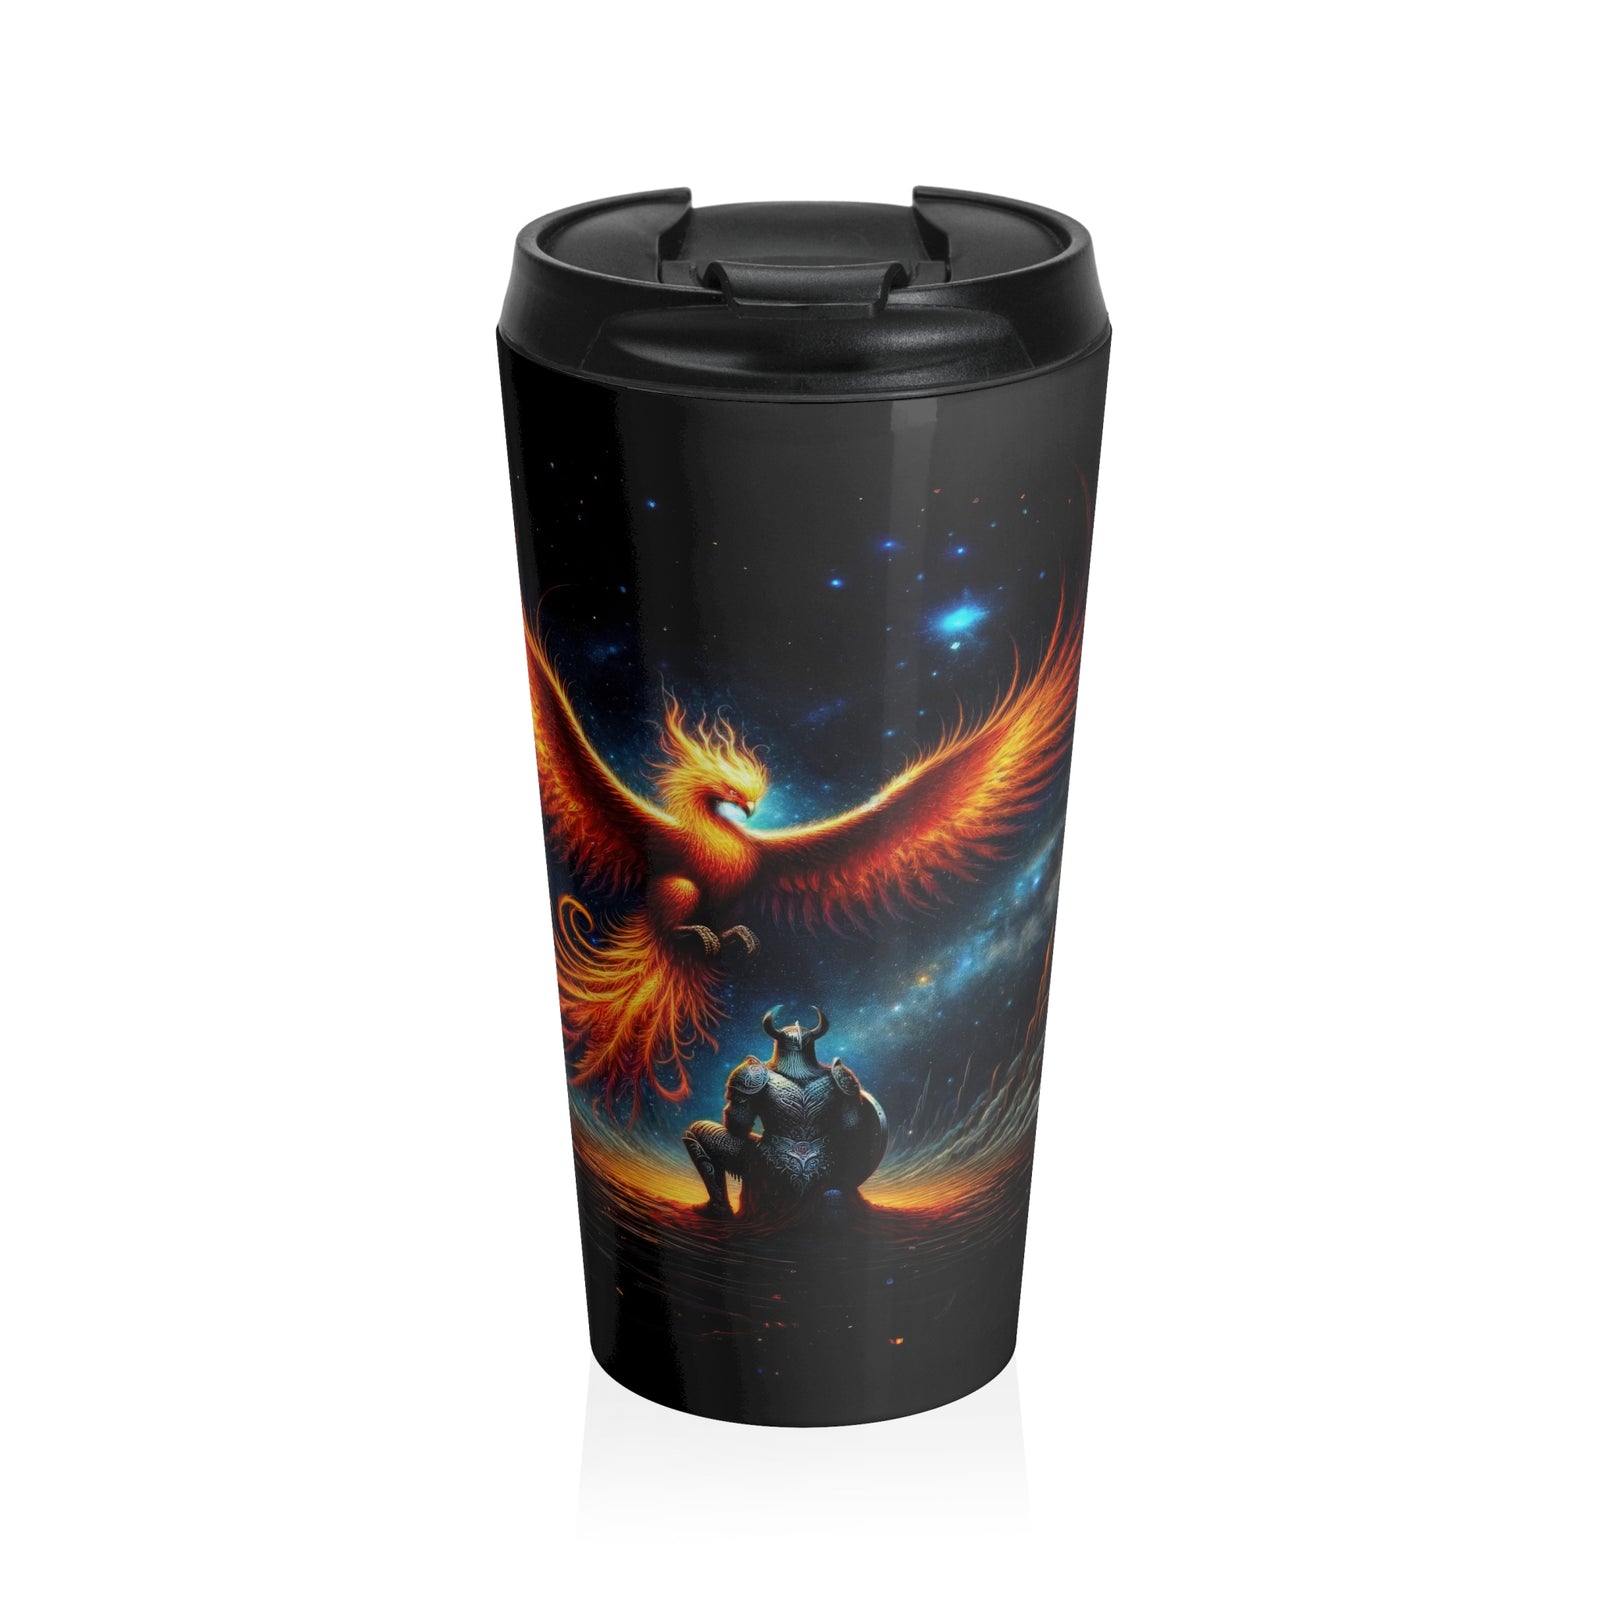 The Cosmic Rebirth of the Phoenix and the Watcher Travel Mug